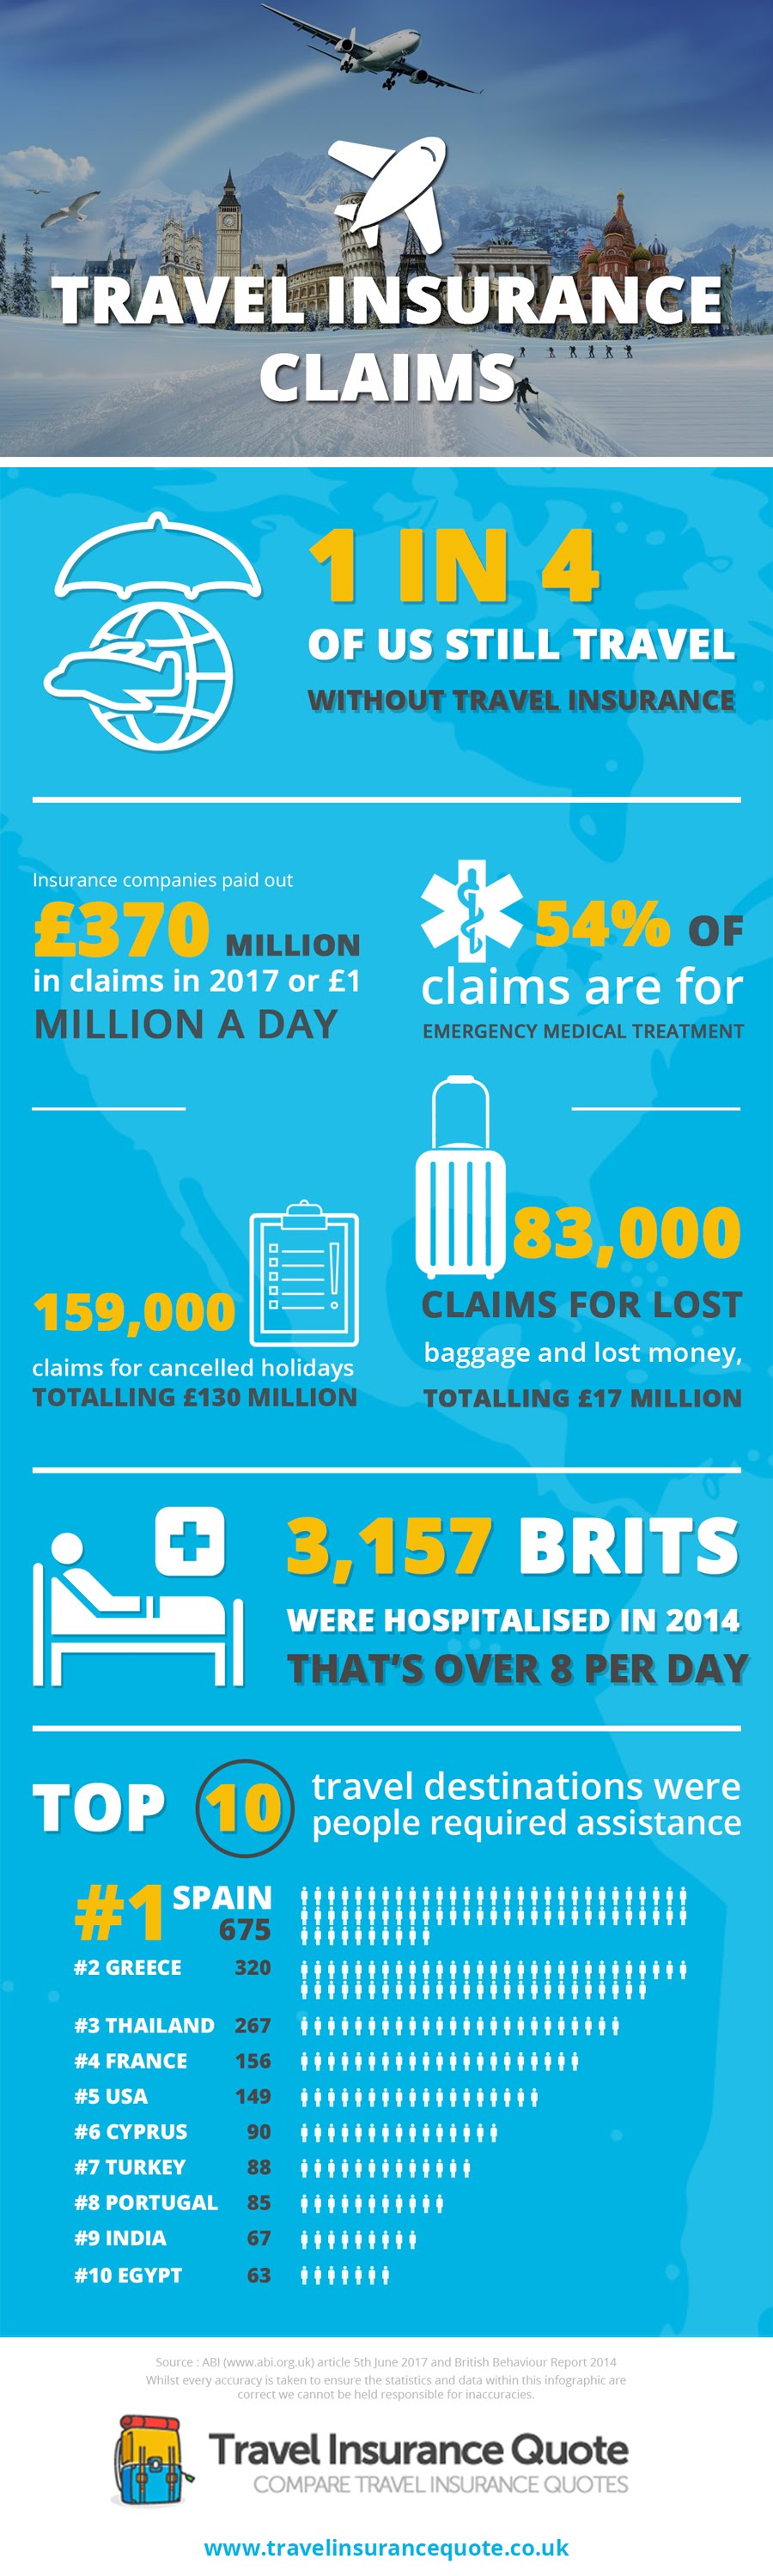 Travel Insurance Claims #infographic